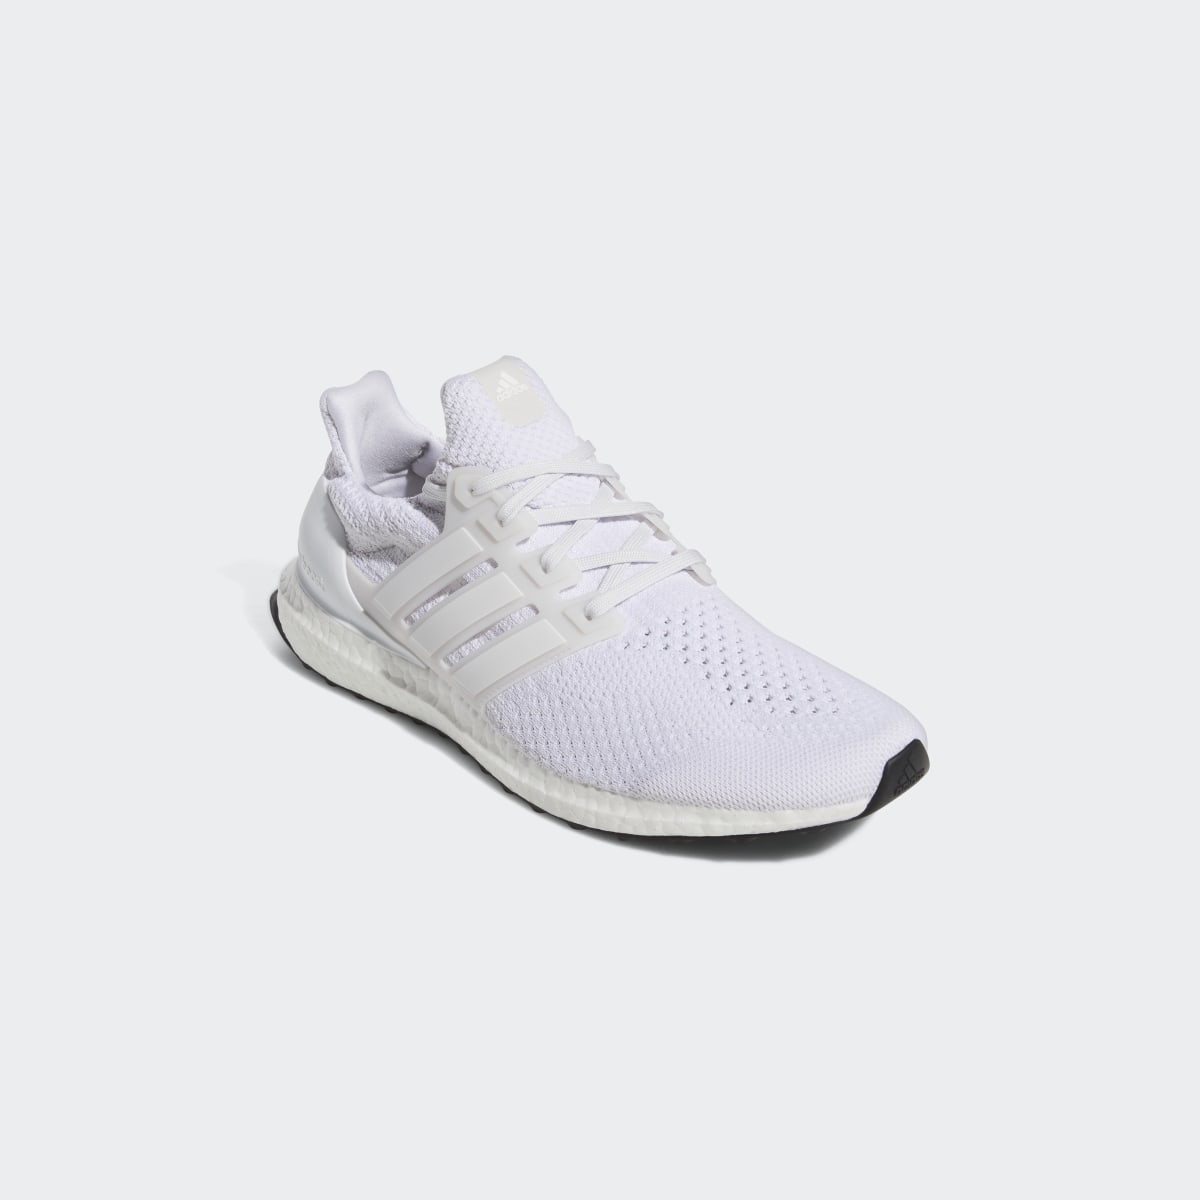 Adidas Ultraboost DNA 5.0 Shoes. 6